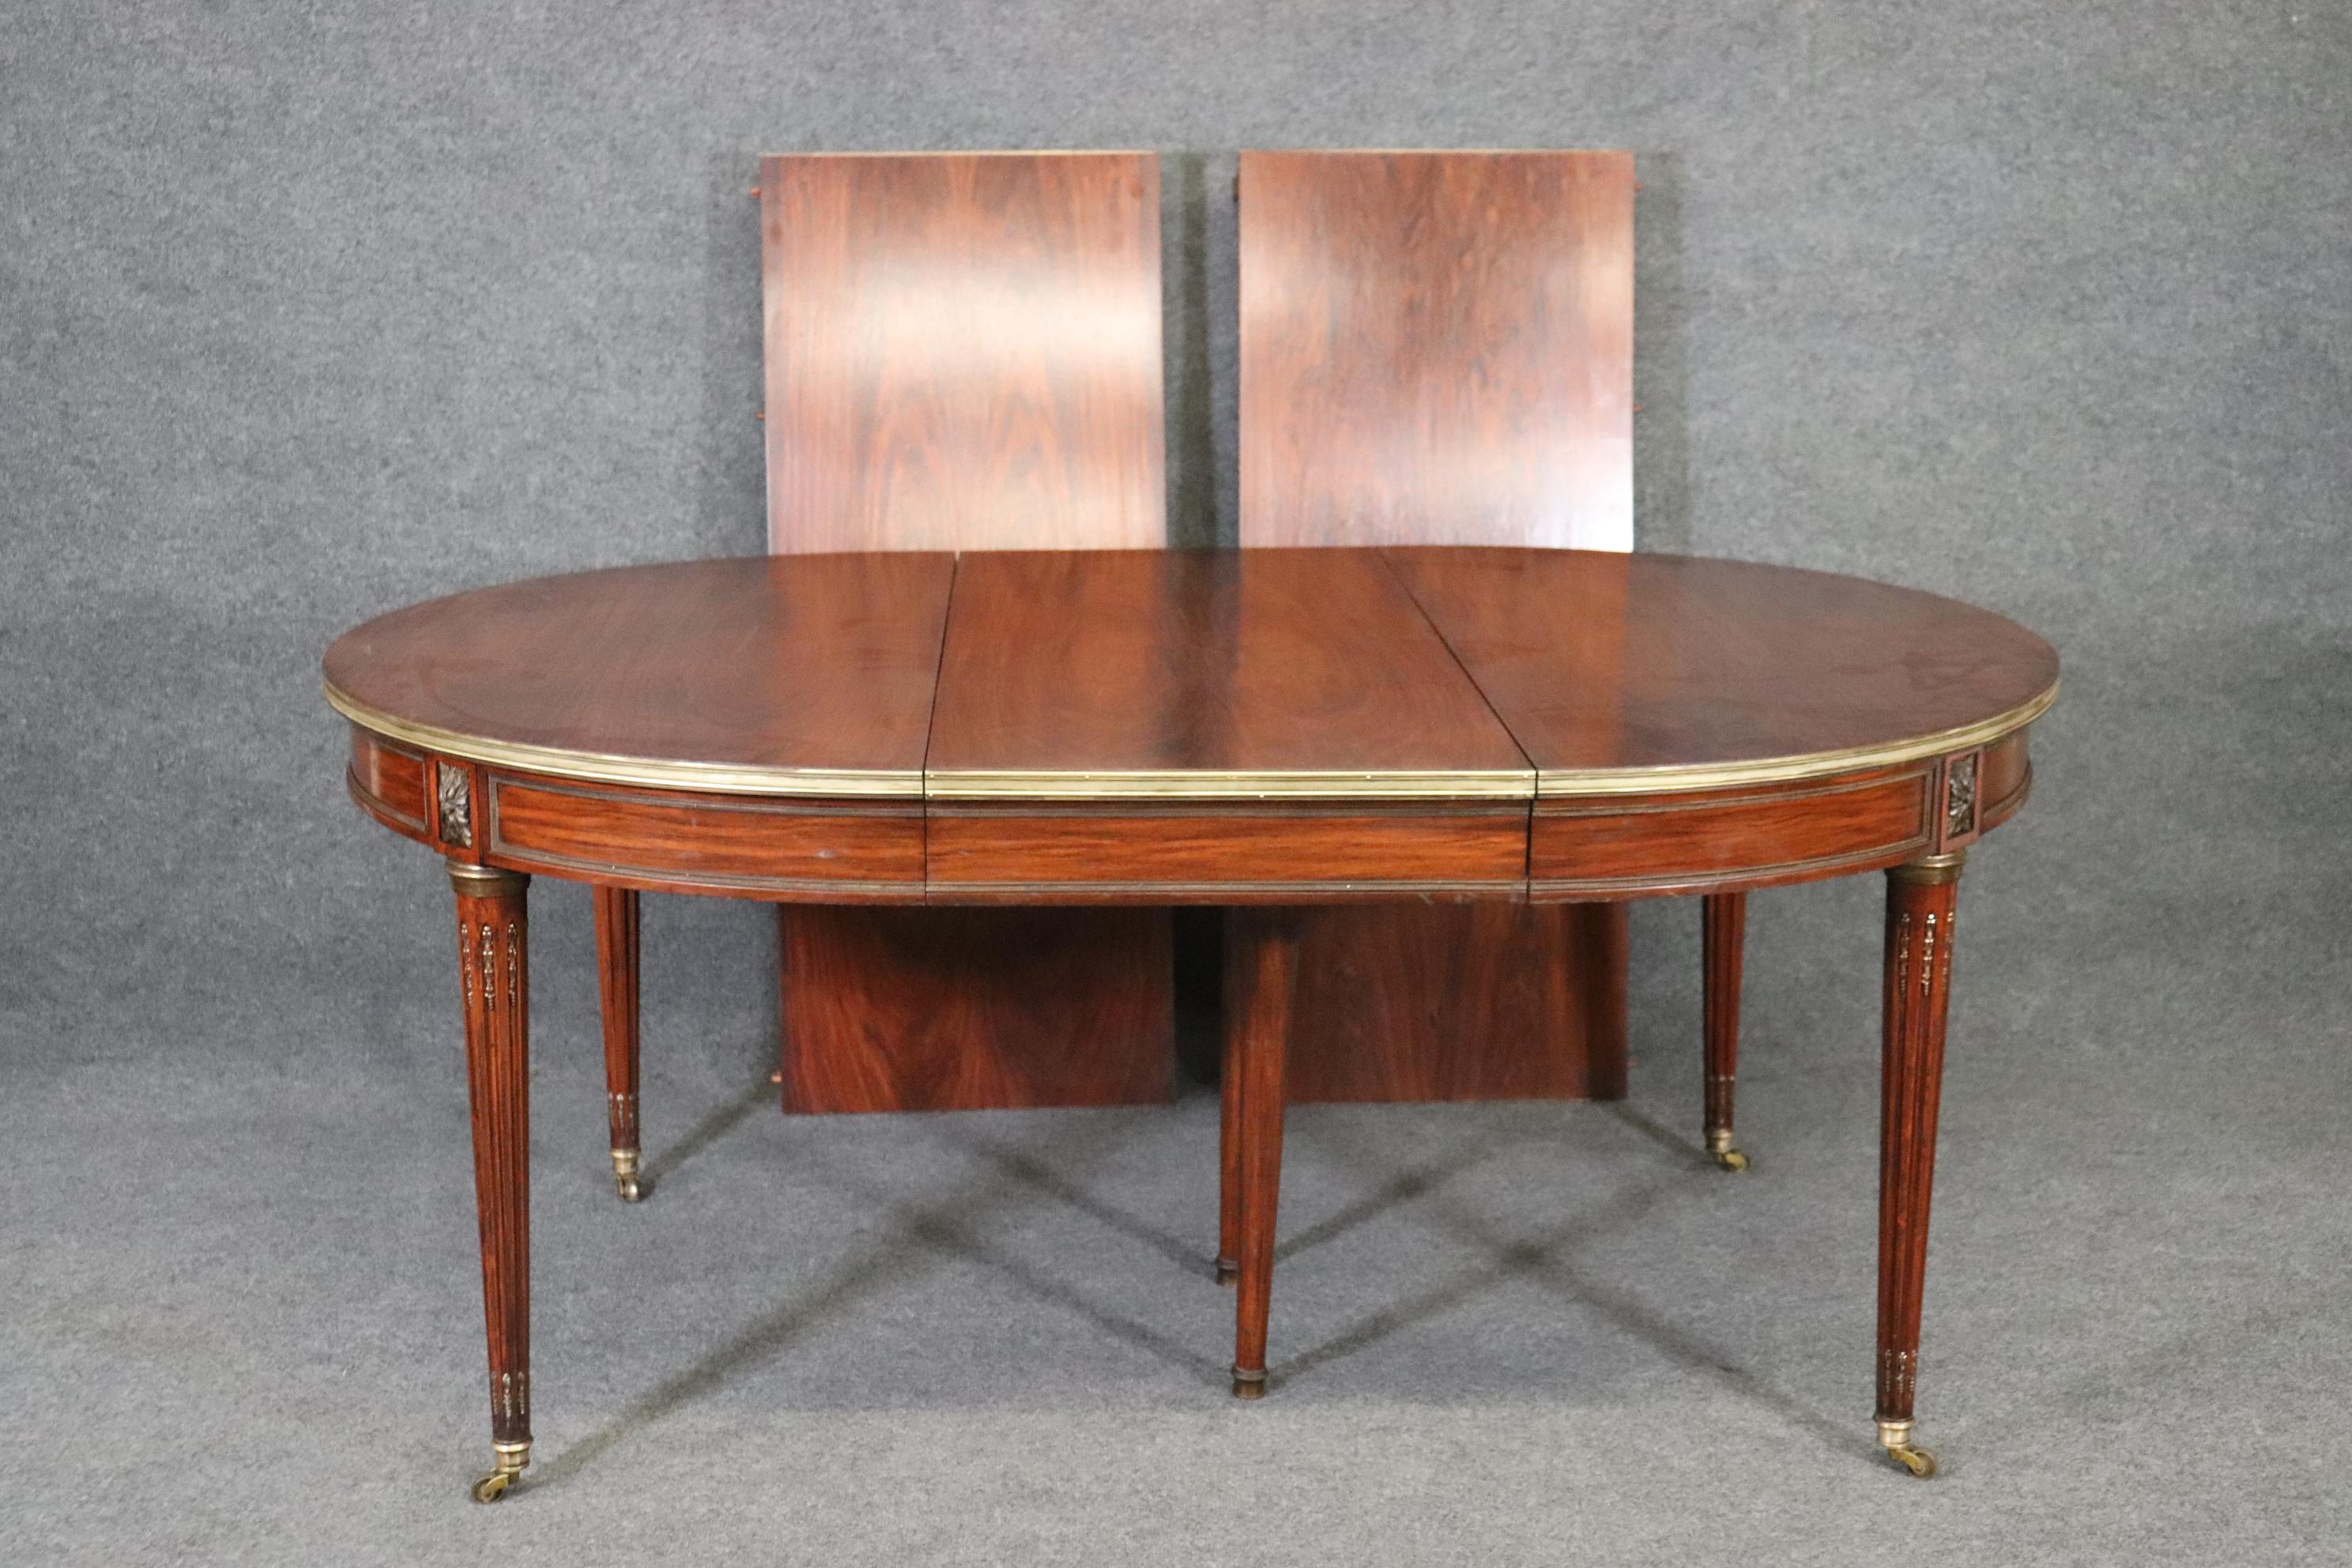 This is one of the rarest of all Maison Jansen dining tables. This form of circular dining table is not rare- but in ROSEWOOD it certainly is! This may be one of a handful of rosewood Jansen tables ever made. This is a unicorn in the world of